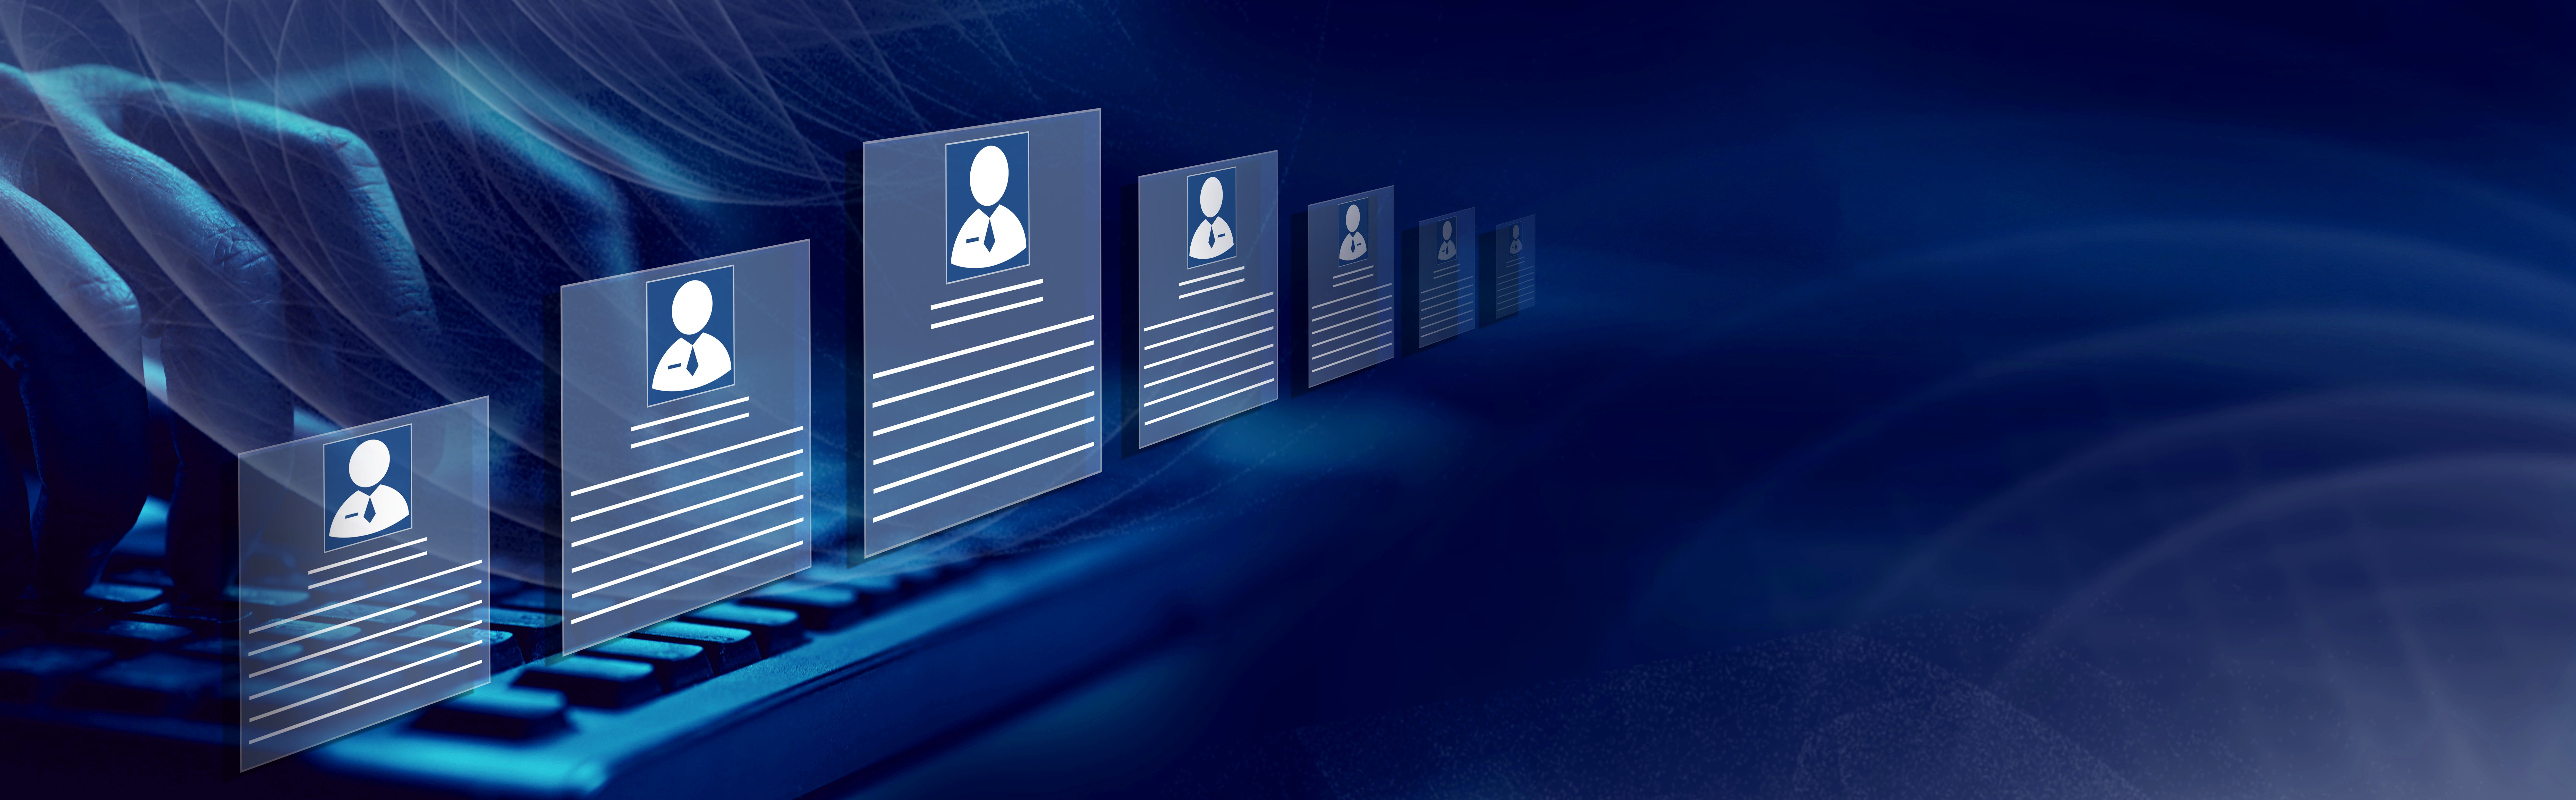 Several illustrations of social media profiles fading into a dark blue background.